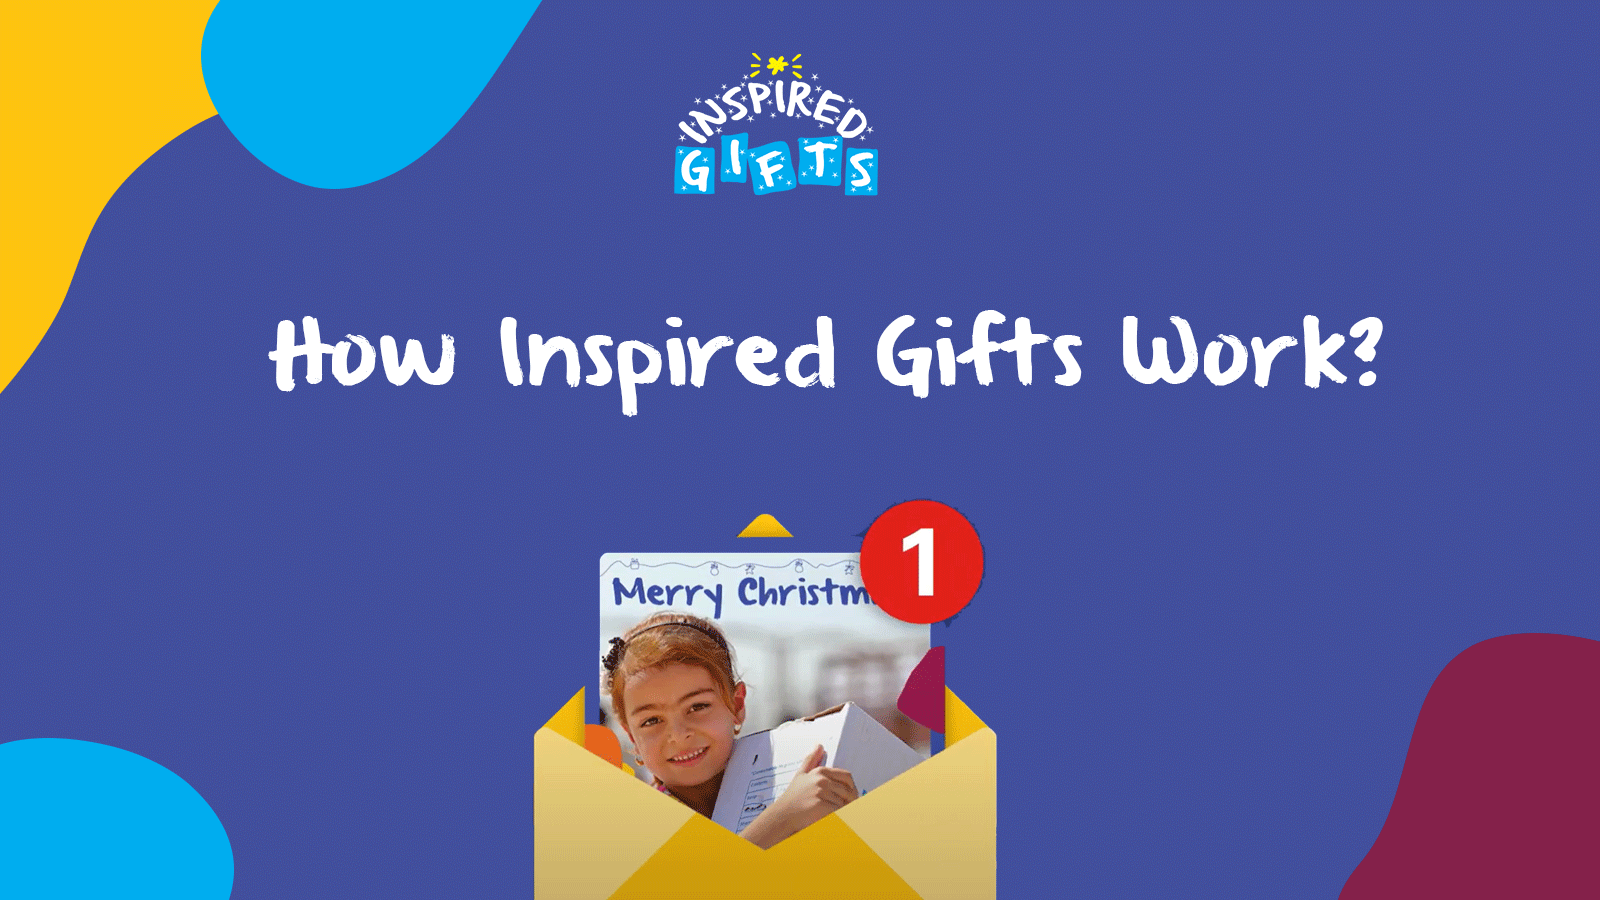 How does Inspired Gifts Work